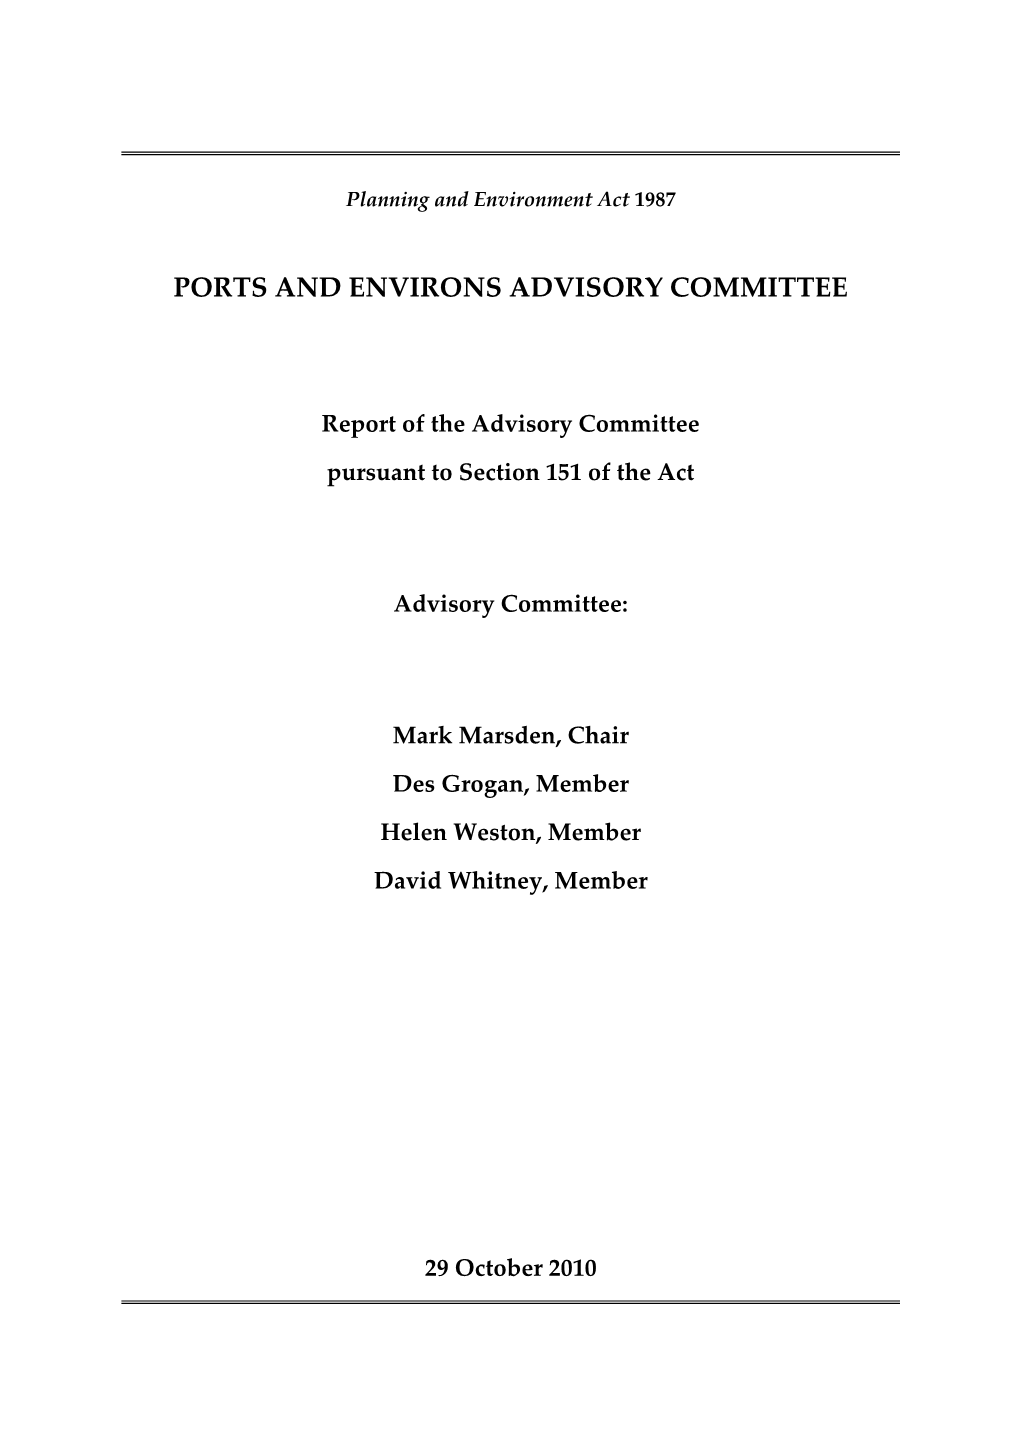 Ports and Environs Advisory Committee